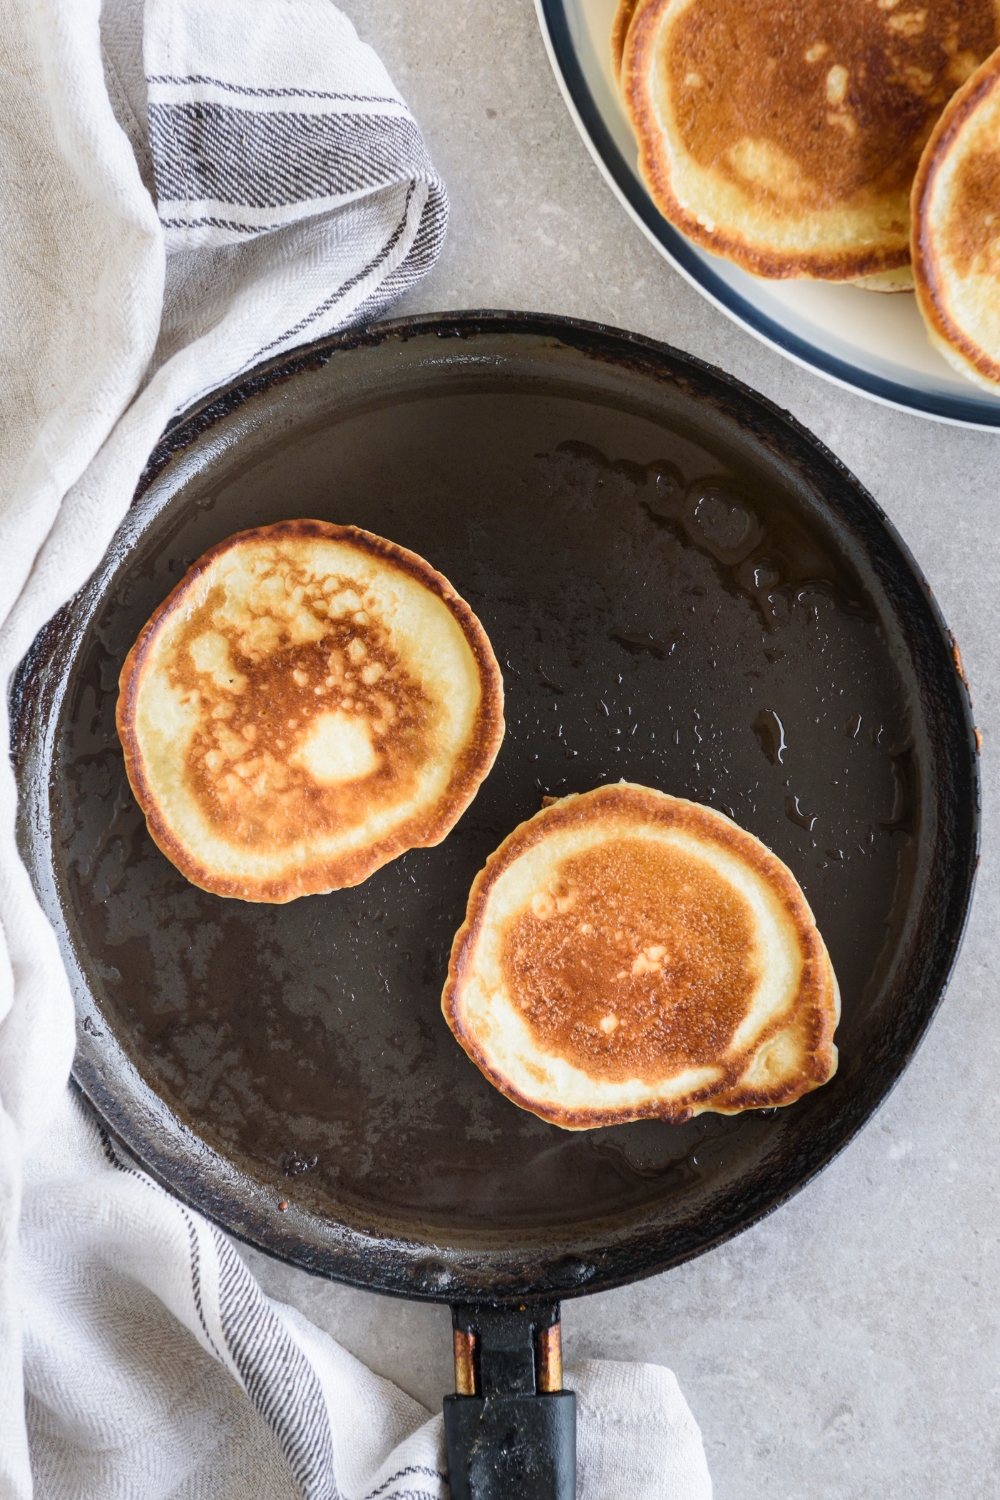 A griddle with two cooked pancakes on it.